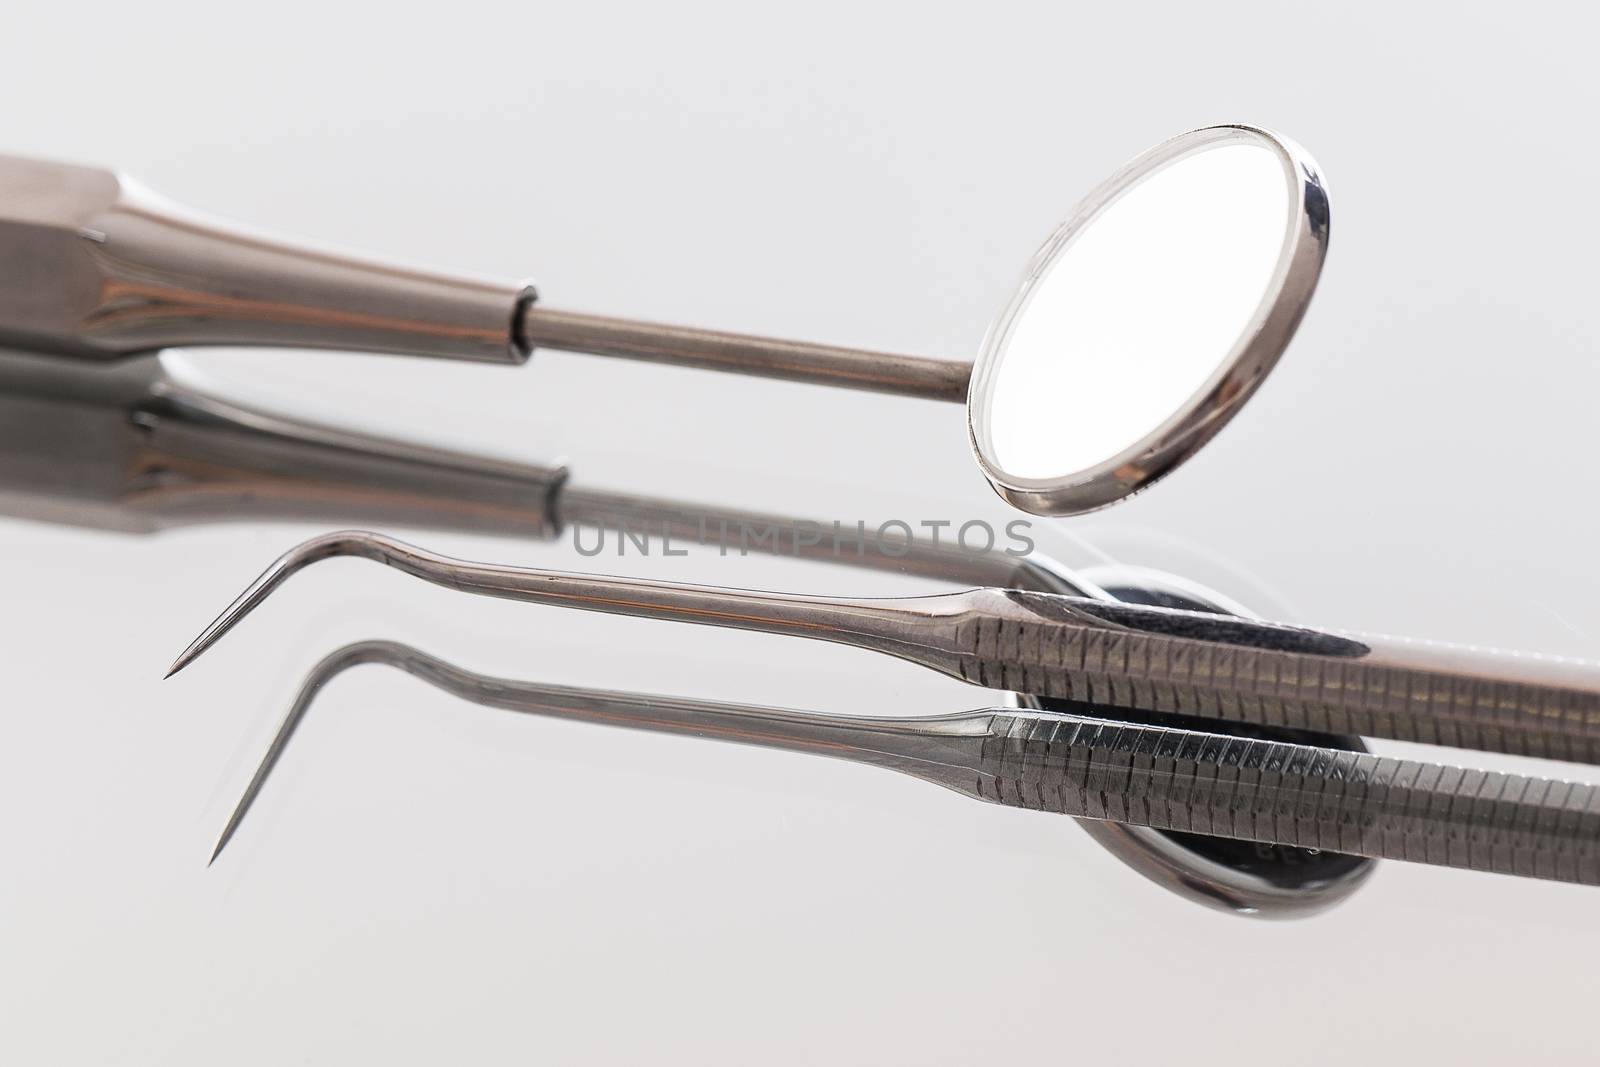 Many instruments that are use by a dentist